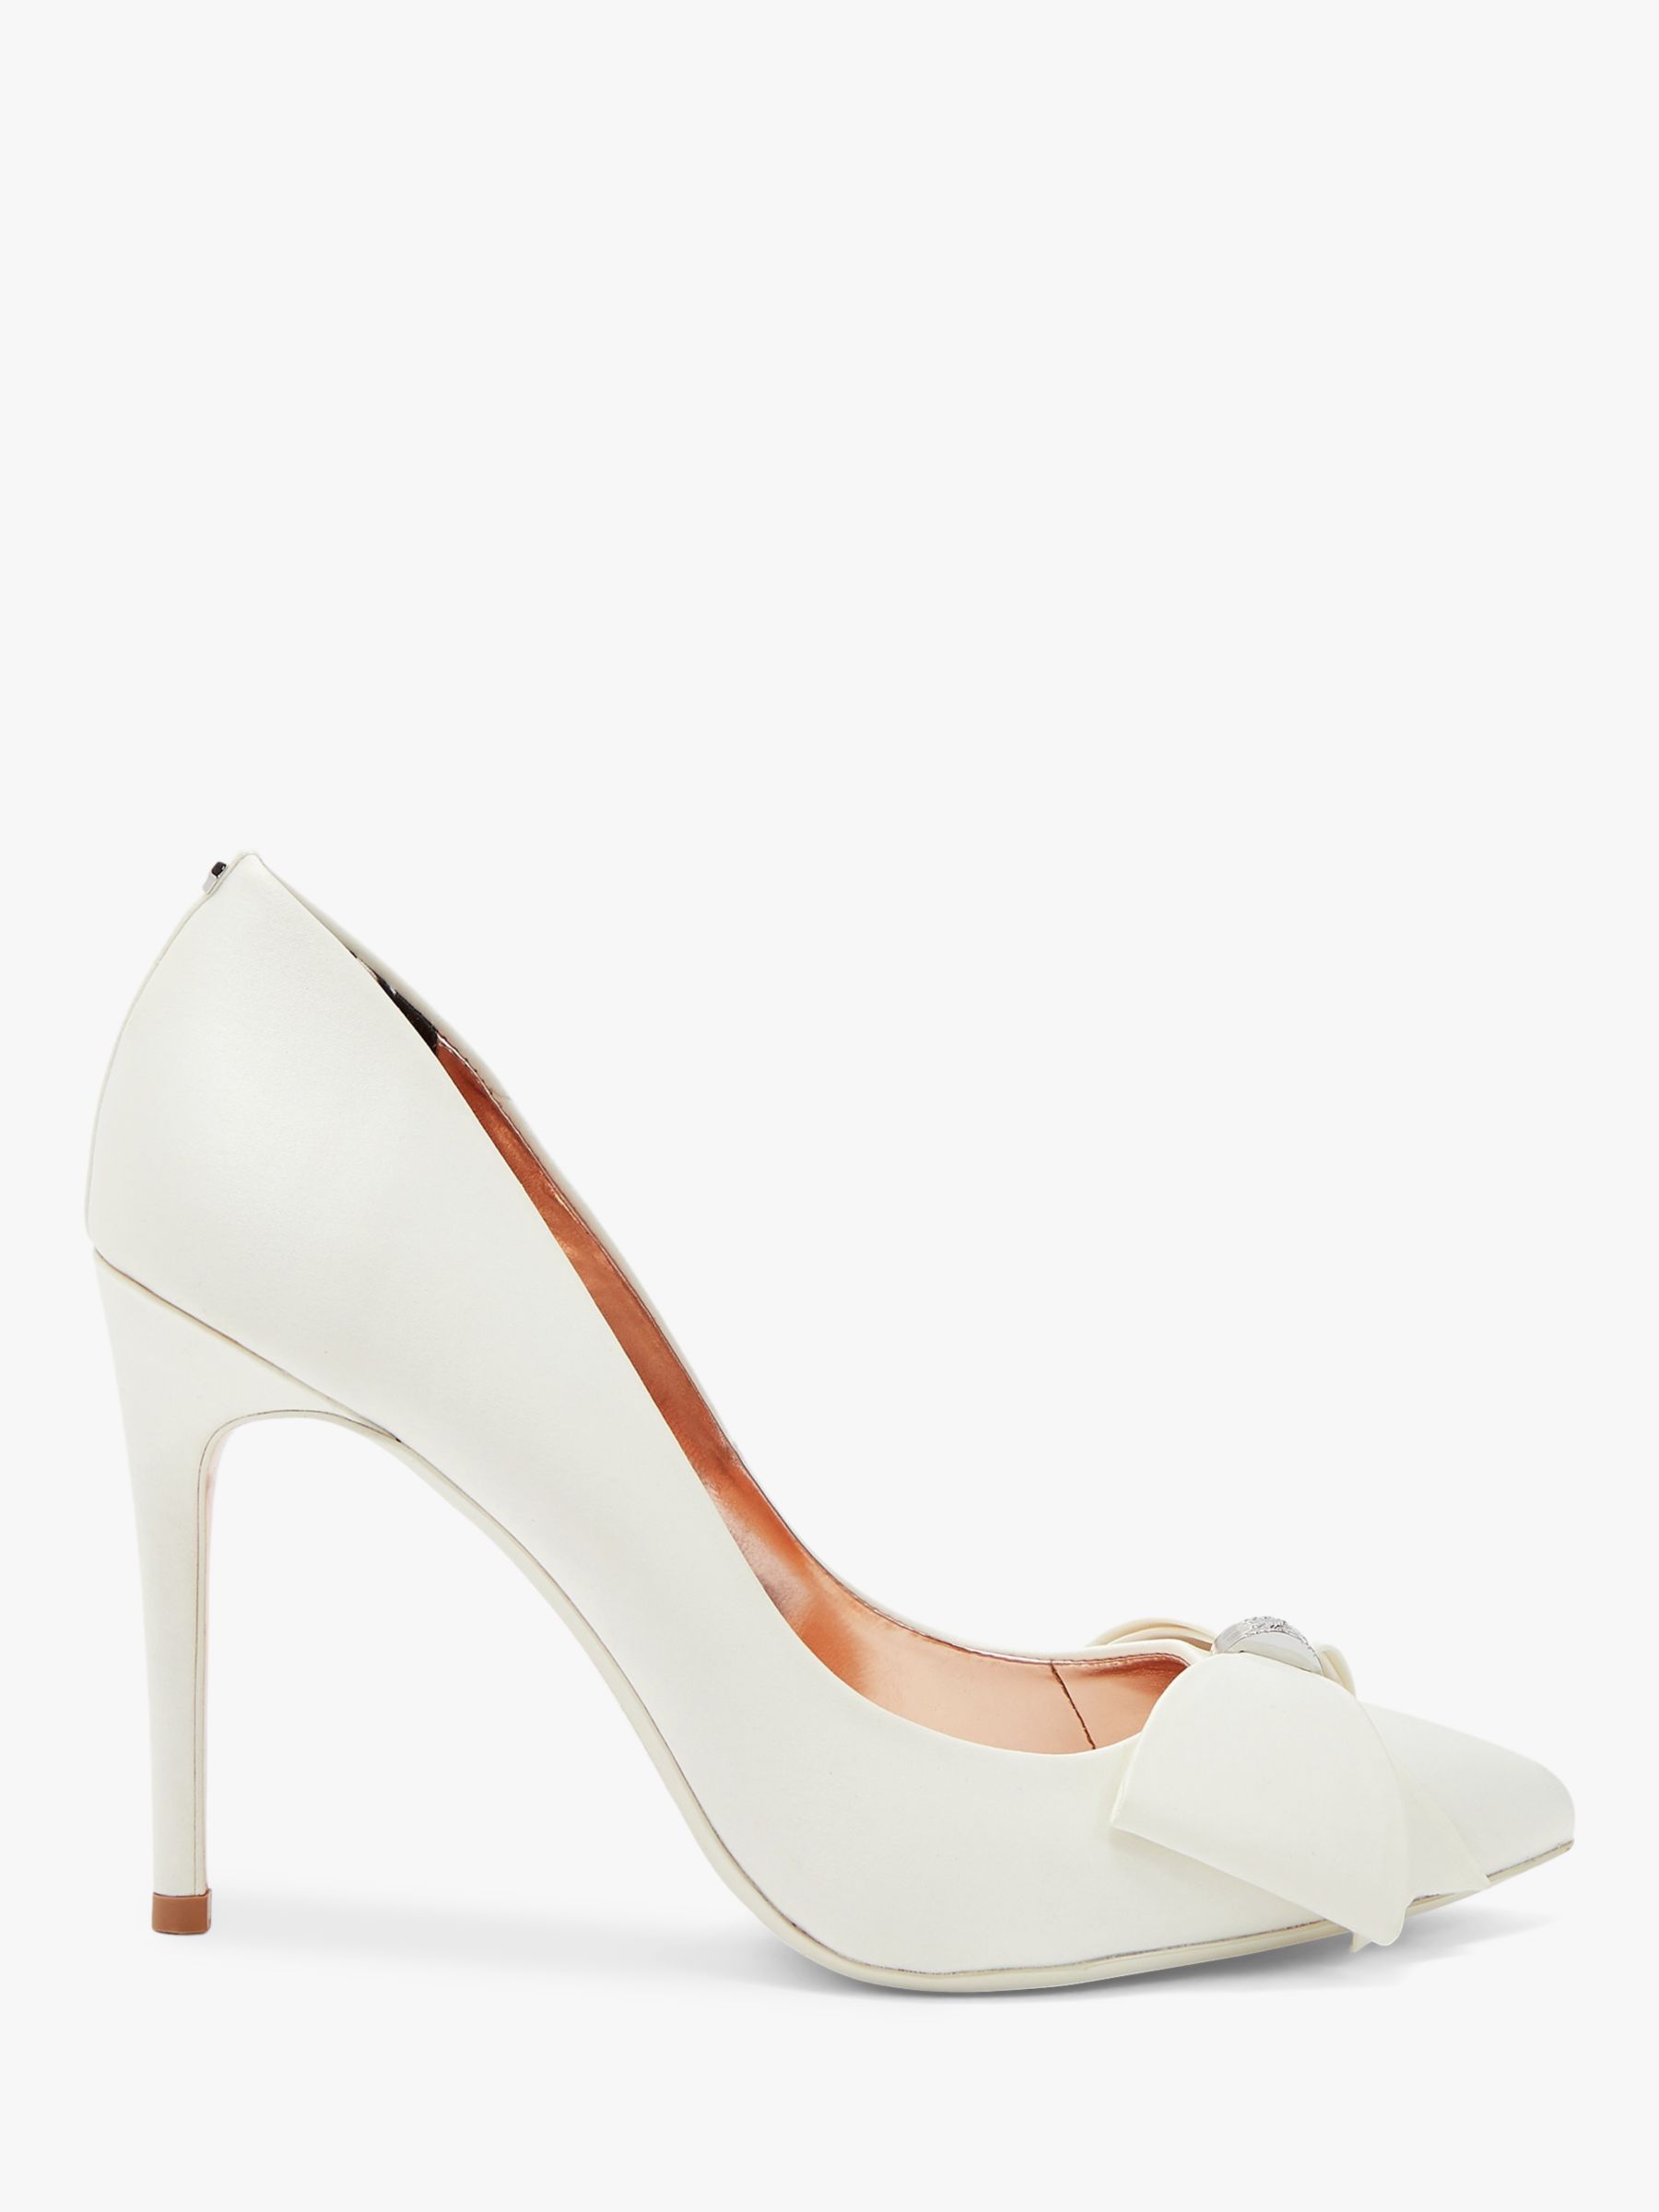 Ted Baker Asellys Stiletto Heel Bow Detail Court Shoes, Ivory, 7